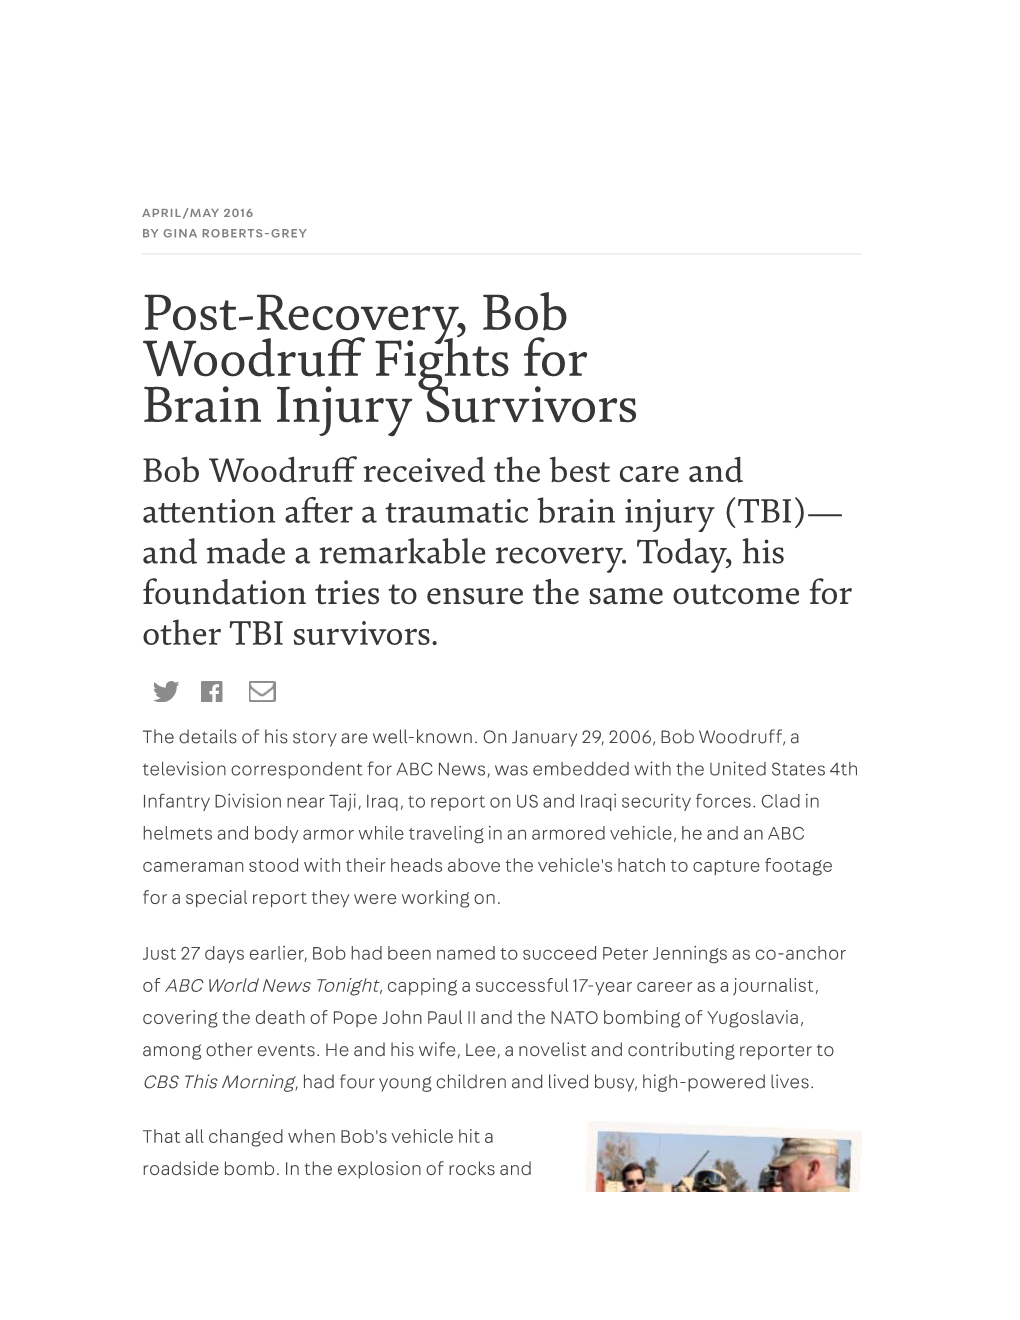 Post-Recovery, Bob Woodru Fights for Brain Injury Survivors